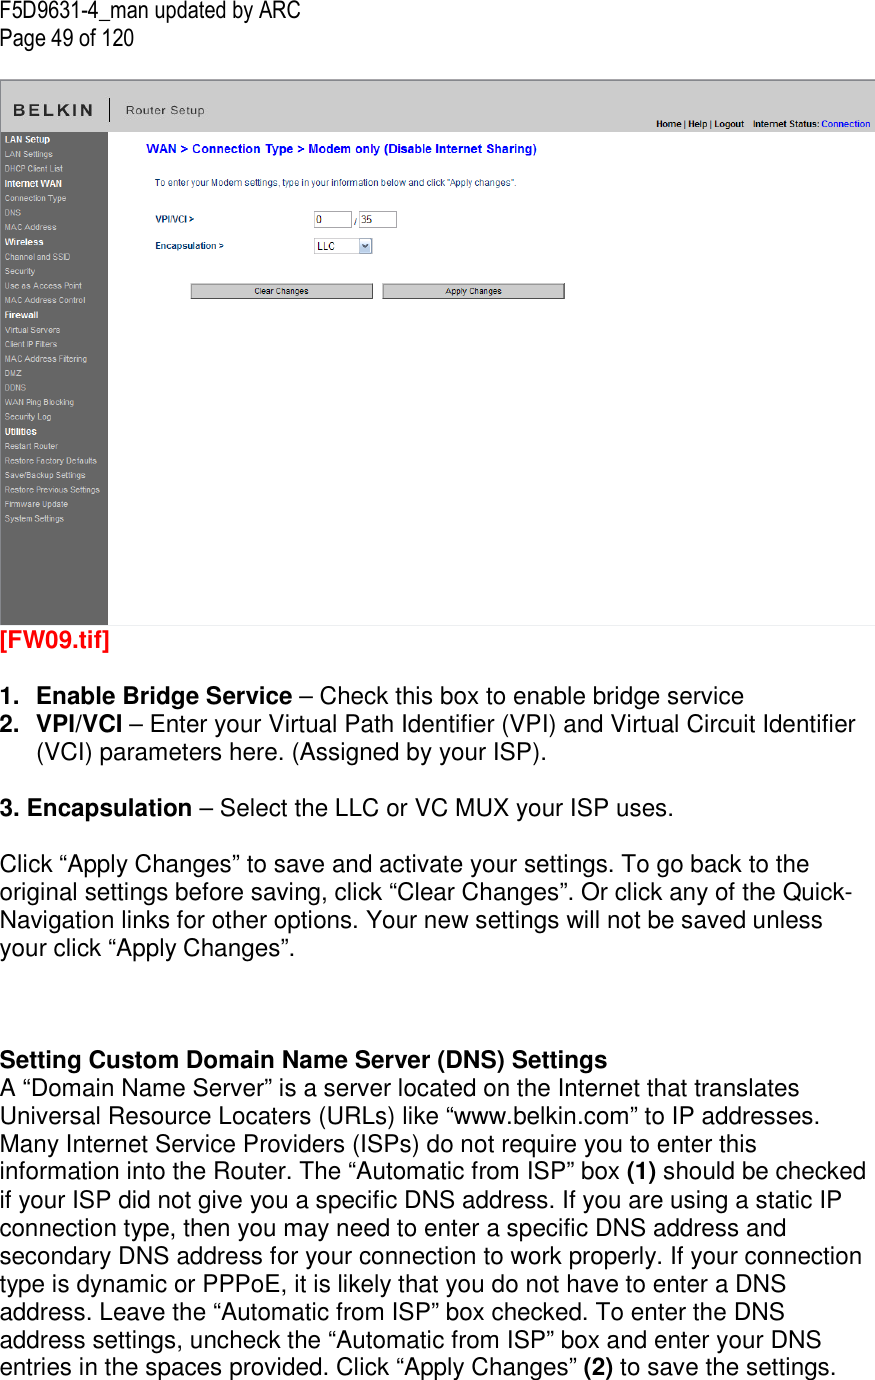 F5D9631-4_man updated by ARC Page 49 of 120   [FW09.tif]  1.  Enable Bridge Service – Check this box to enable bridge service  2.  VPI/VCI – Enter your Virtual Path Identifier (VPI) and Virtual Circuit Identifier (VCI) parameters here. (Assigned by your ISP).   3. Encapsulation – Select the LLC or VC MUX your ISP uses.  Click “Apply Changes” to save and activate your settings. To go back to the original settings before saving, click “Clear Changes”. Or click any of the Quick-Navigation links for other options. Your new settings will not be saved unless your click “Apply Changes”.    Setting Custom Domain Name Server (DNS) Settings A “Domain Name Server” is a server located on the Internet that translates Universal Resource Locaters (URLs) like “www.belkin.com” to IP addresses. Many Internet Service Providers (ISPs) do not require you to enter this information into the Router. The “Automatic from ISP” box (1) should be checked if your ISP did not give you a specific DNS address. If you are using a static IP connection type, then you may need to enter a specific DNS address and secondary DNS address for your connection to work properly. If your connection type is dynamic or PPPoE, it is likely that you do not have to enter a DNS address. Leave the “Automatic from ISP” box checked. To enter the DNS address settings, uncheck the “Automatic from ISP” box and enter your DNS entries in the spaces provided. Click “Apply Changes” (2) to save the settings.